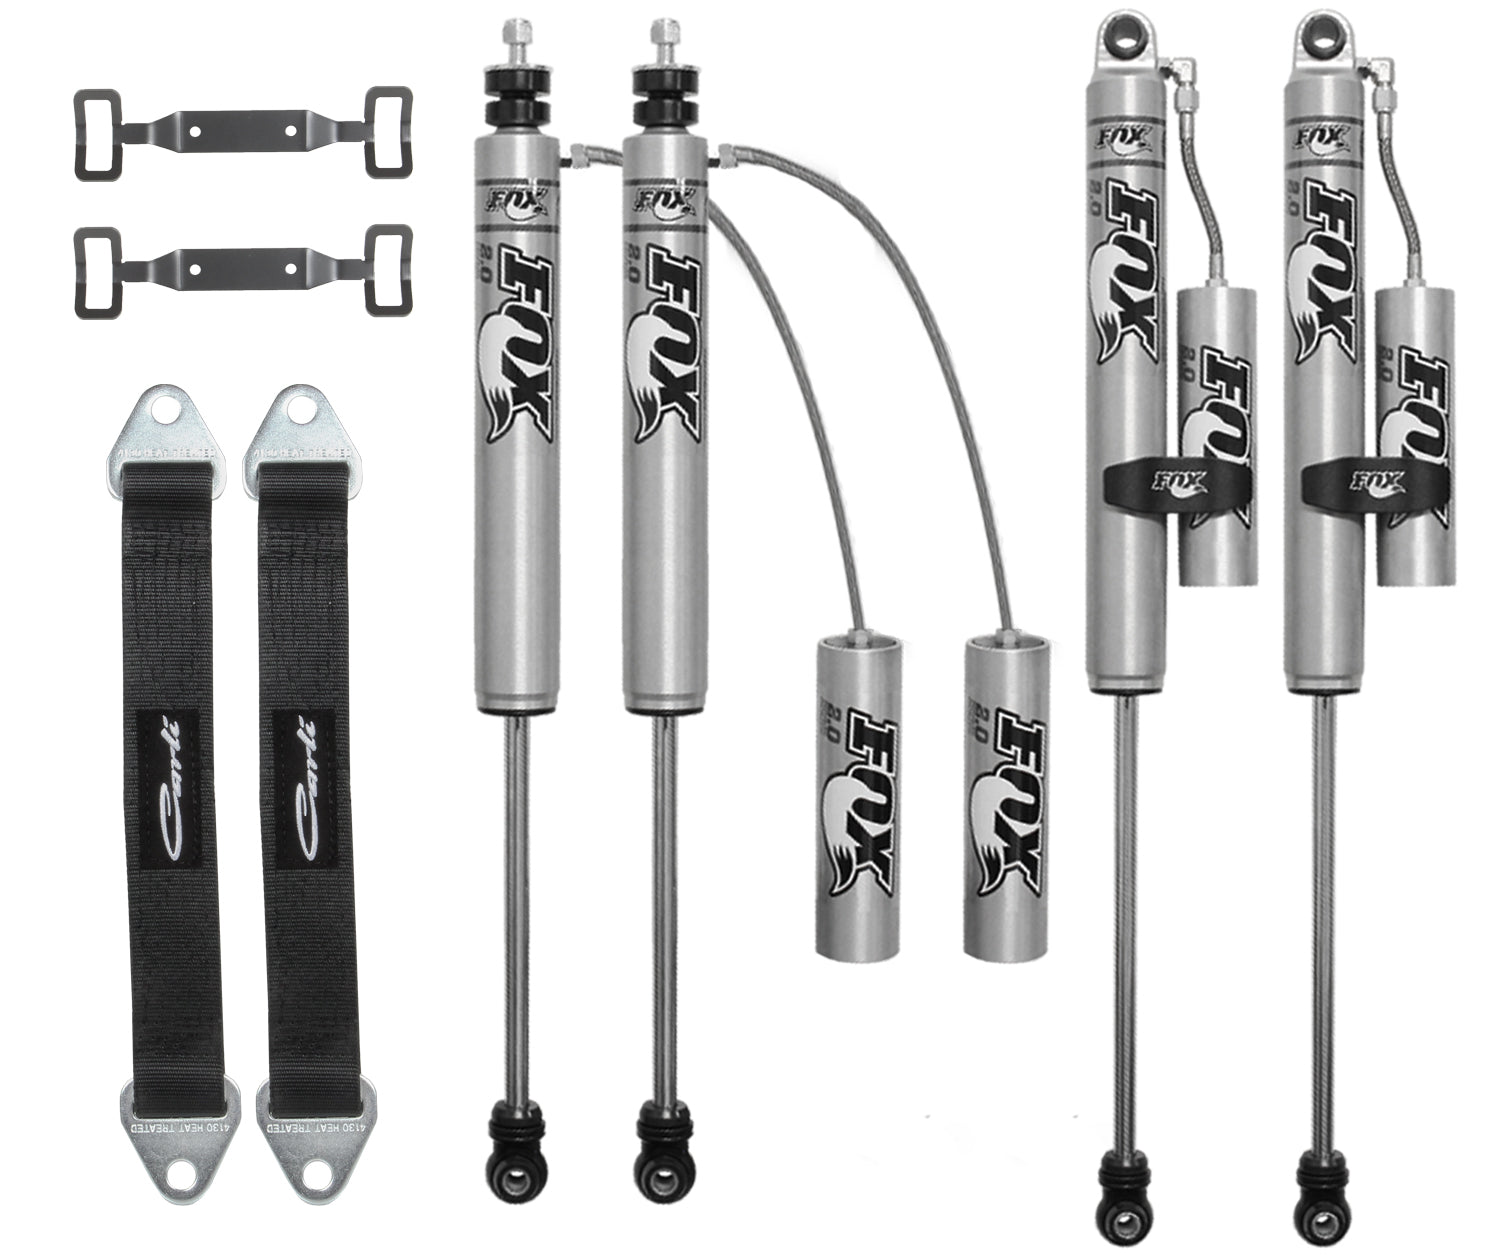 Backcountry Series Shock Package